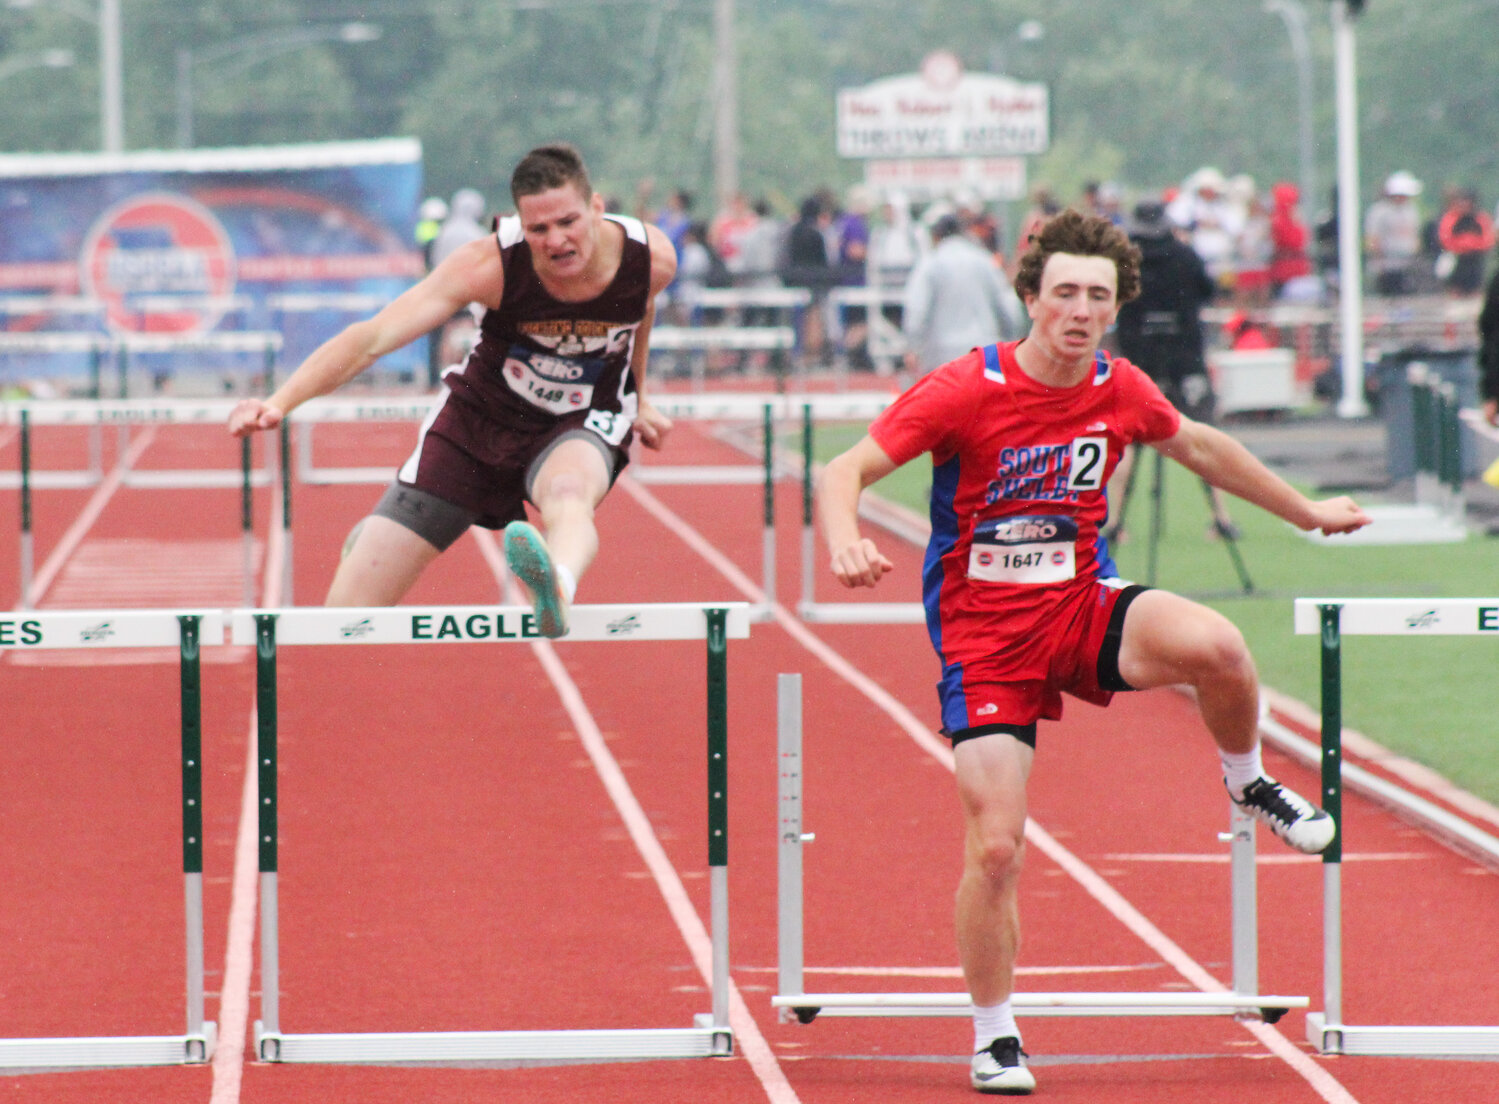 MMA senior Gabe Canonico leaps in the 300-meter hurdles on Friday in the Class 2 state meet. Canonico missed the podium but wrapped up a second straight trip to state.